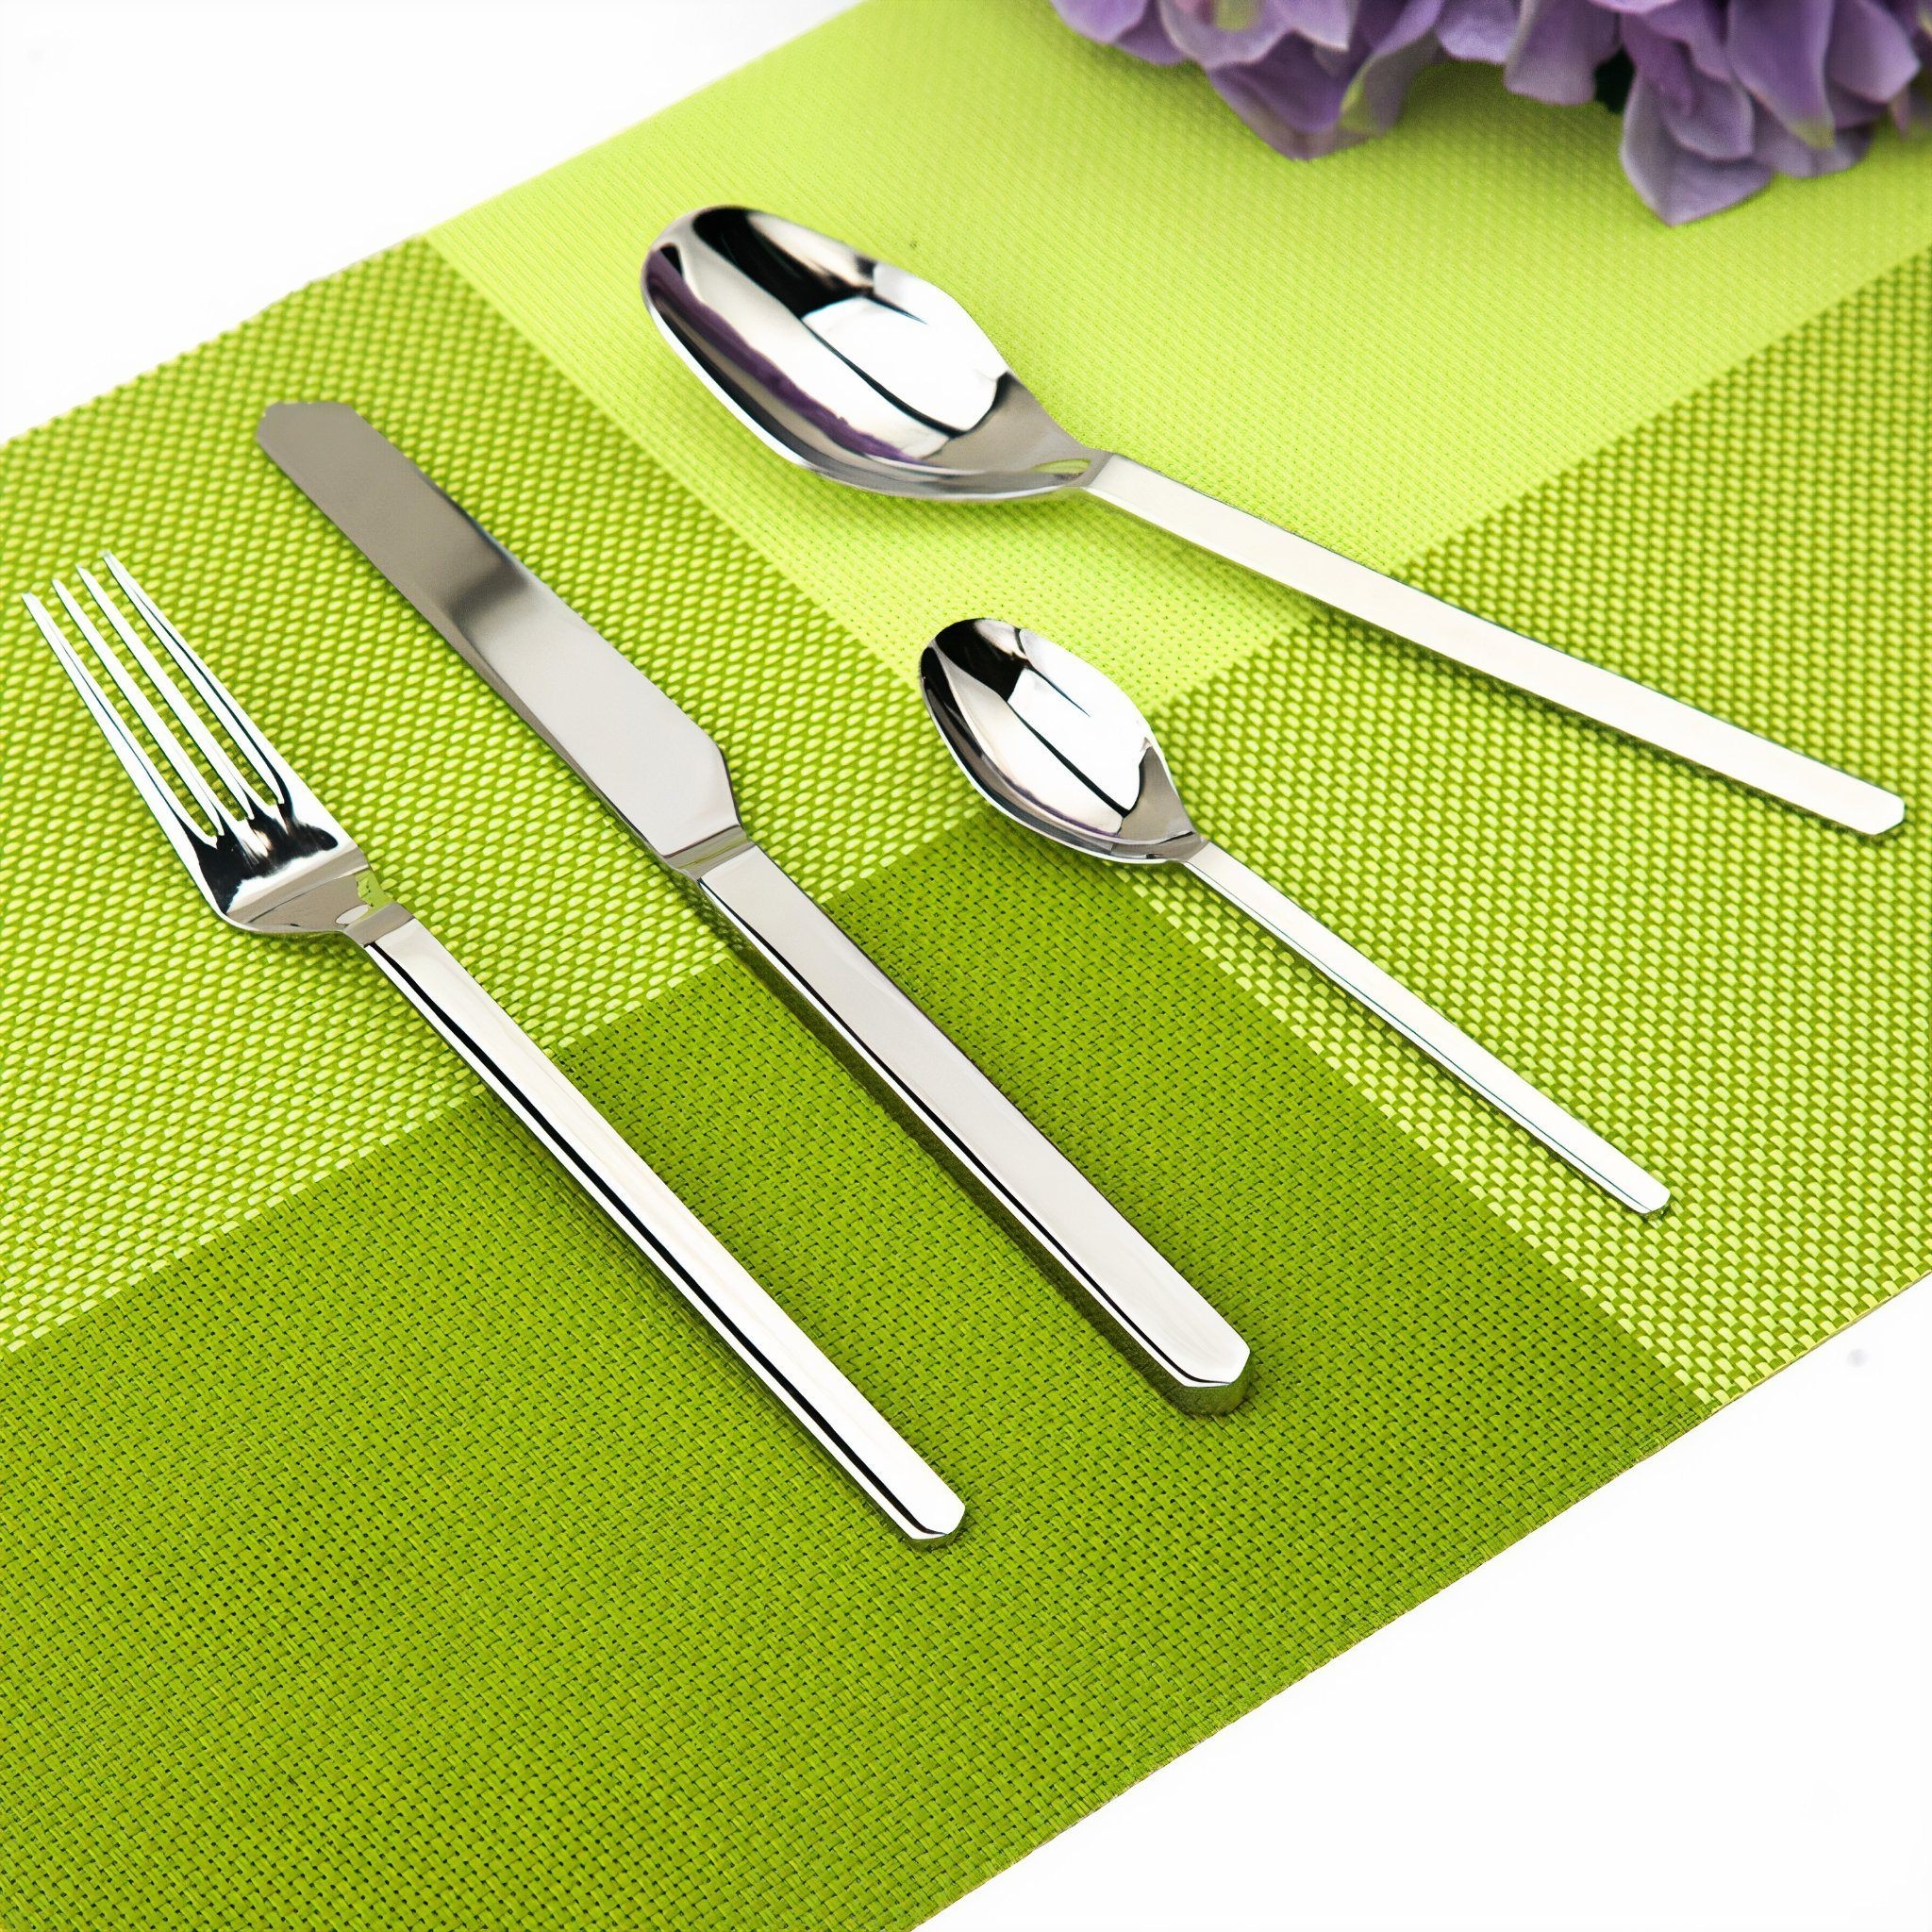 24-Piece Geometric Cutlery – Silver – Metal / Stainless Steel – The Trouvailles